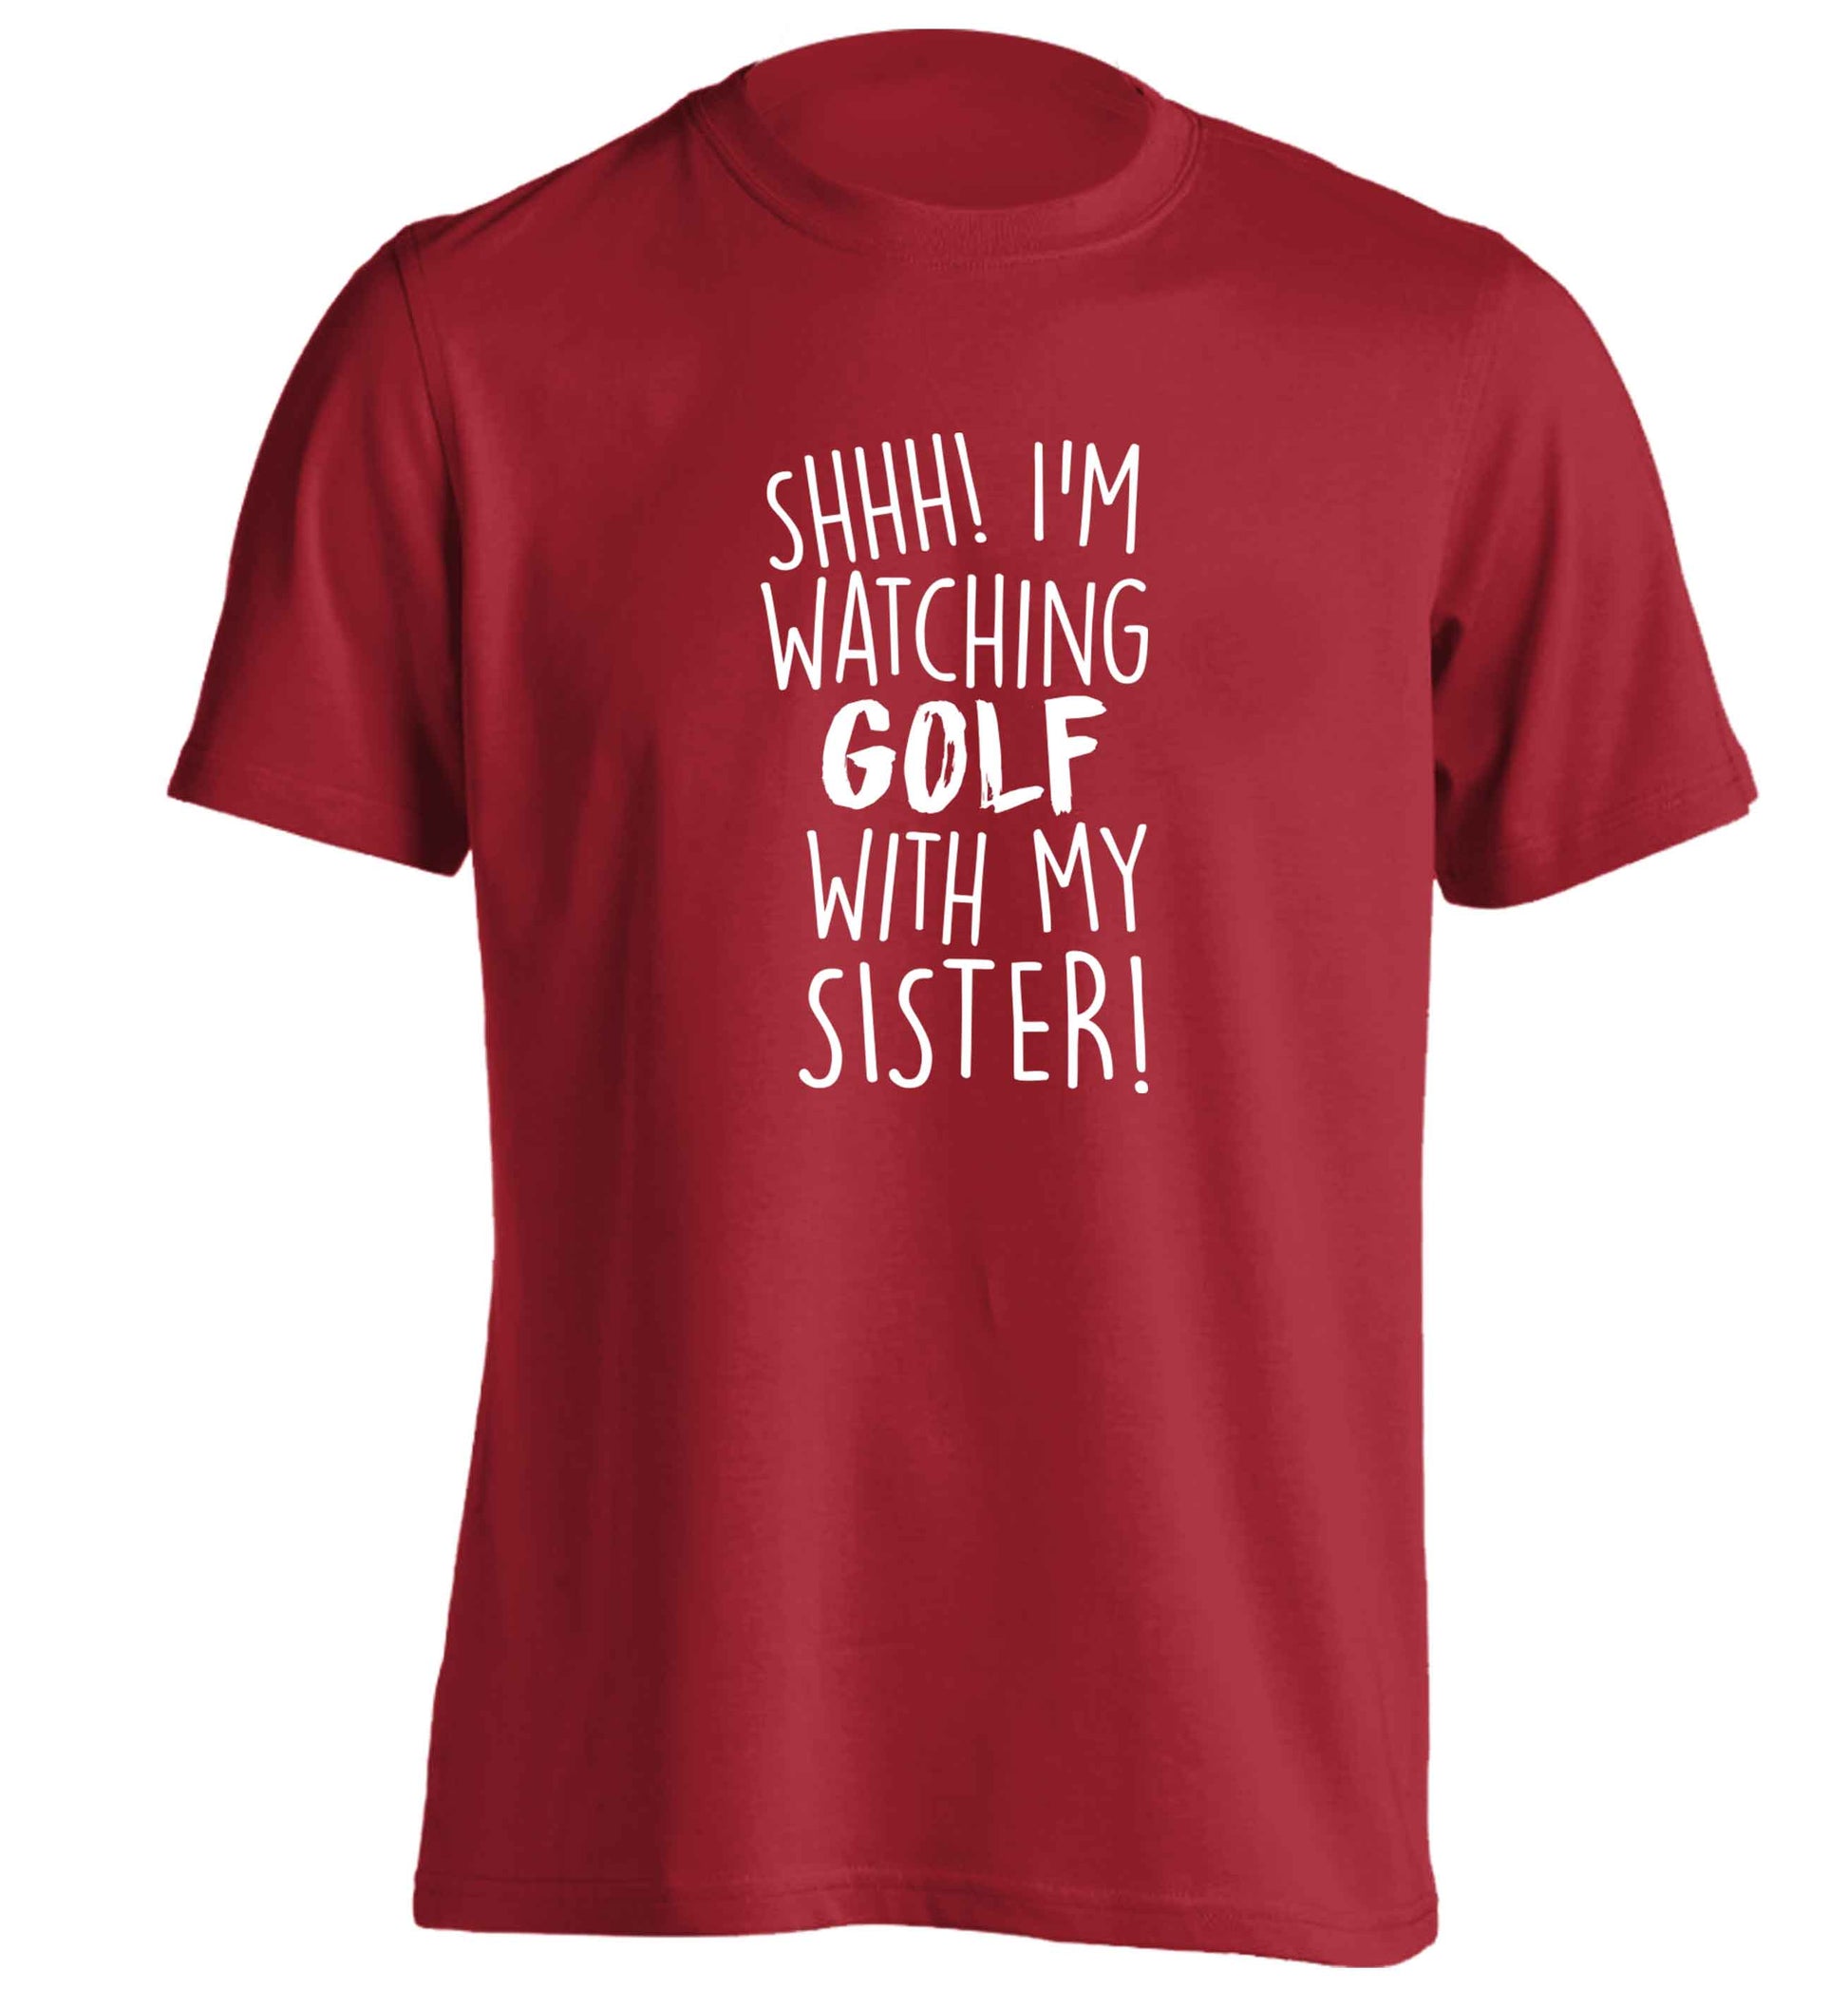 Shh I'm watching golf with my sister adults unisex red Tshirt 2XL